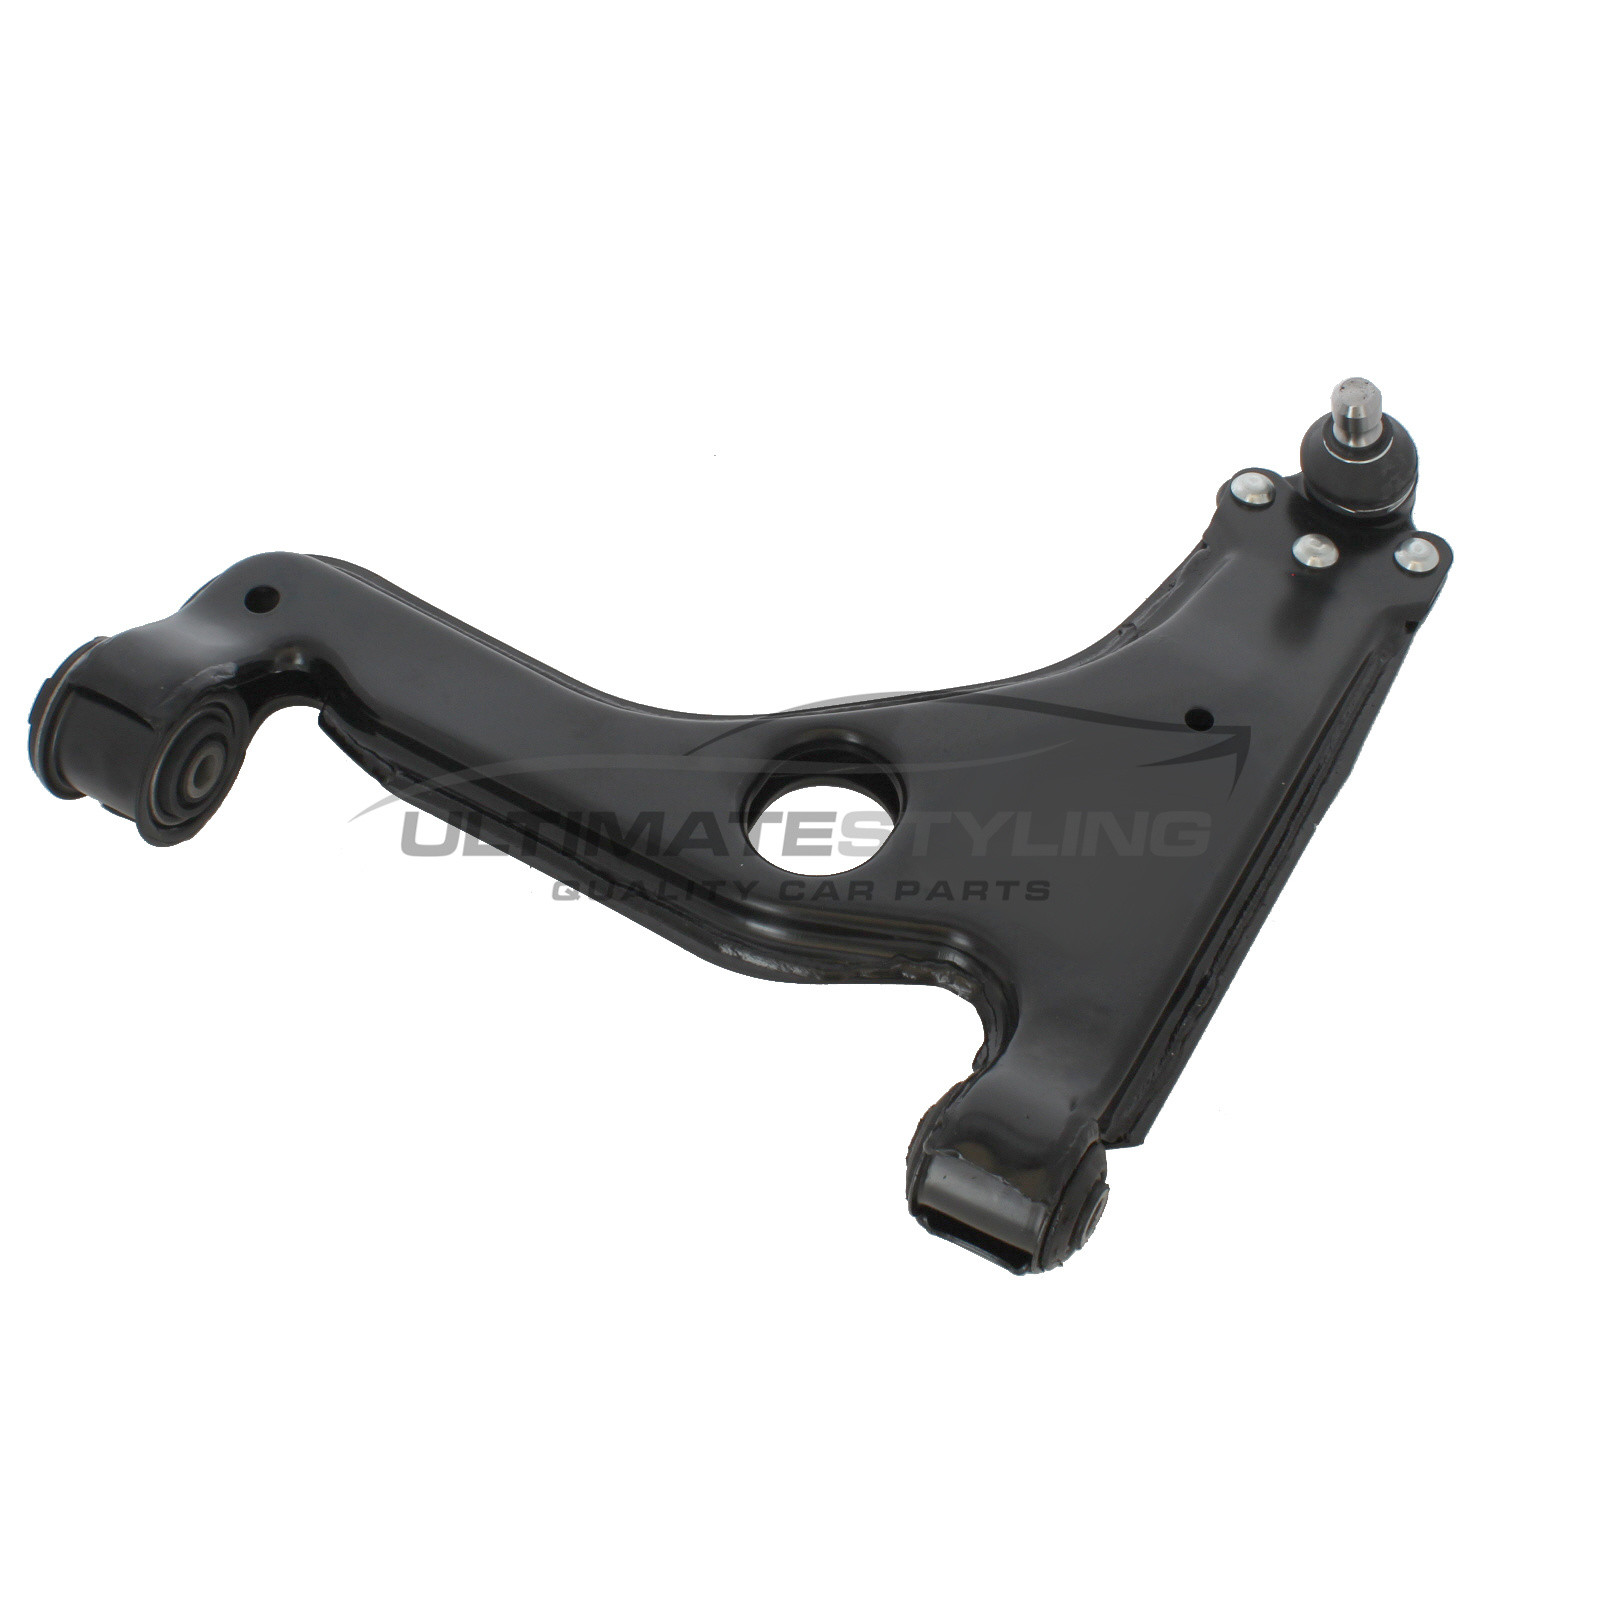 Vauxhall Astra 1998-2005, Vauxhall Vectra 1995-2002, Vauxhall Zafira 1999-2005 Front Lower Suspension Arm (Steel) Including 15mm Ball Joint and Rear Bush Passenger Side (LH)